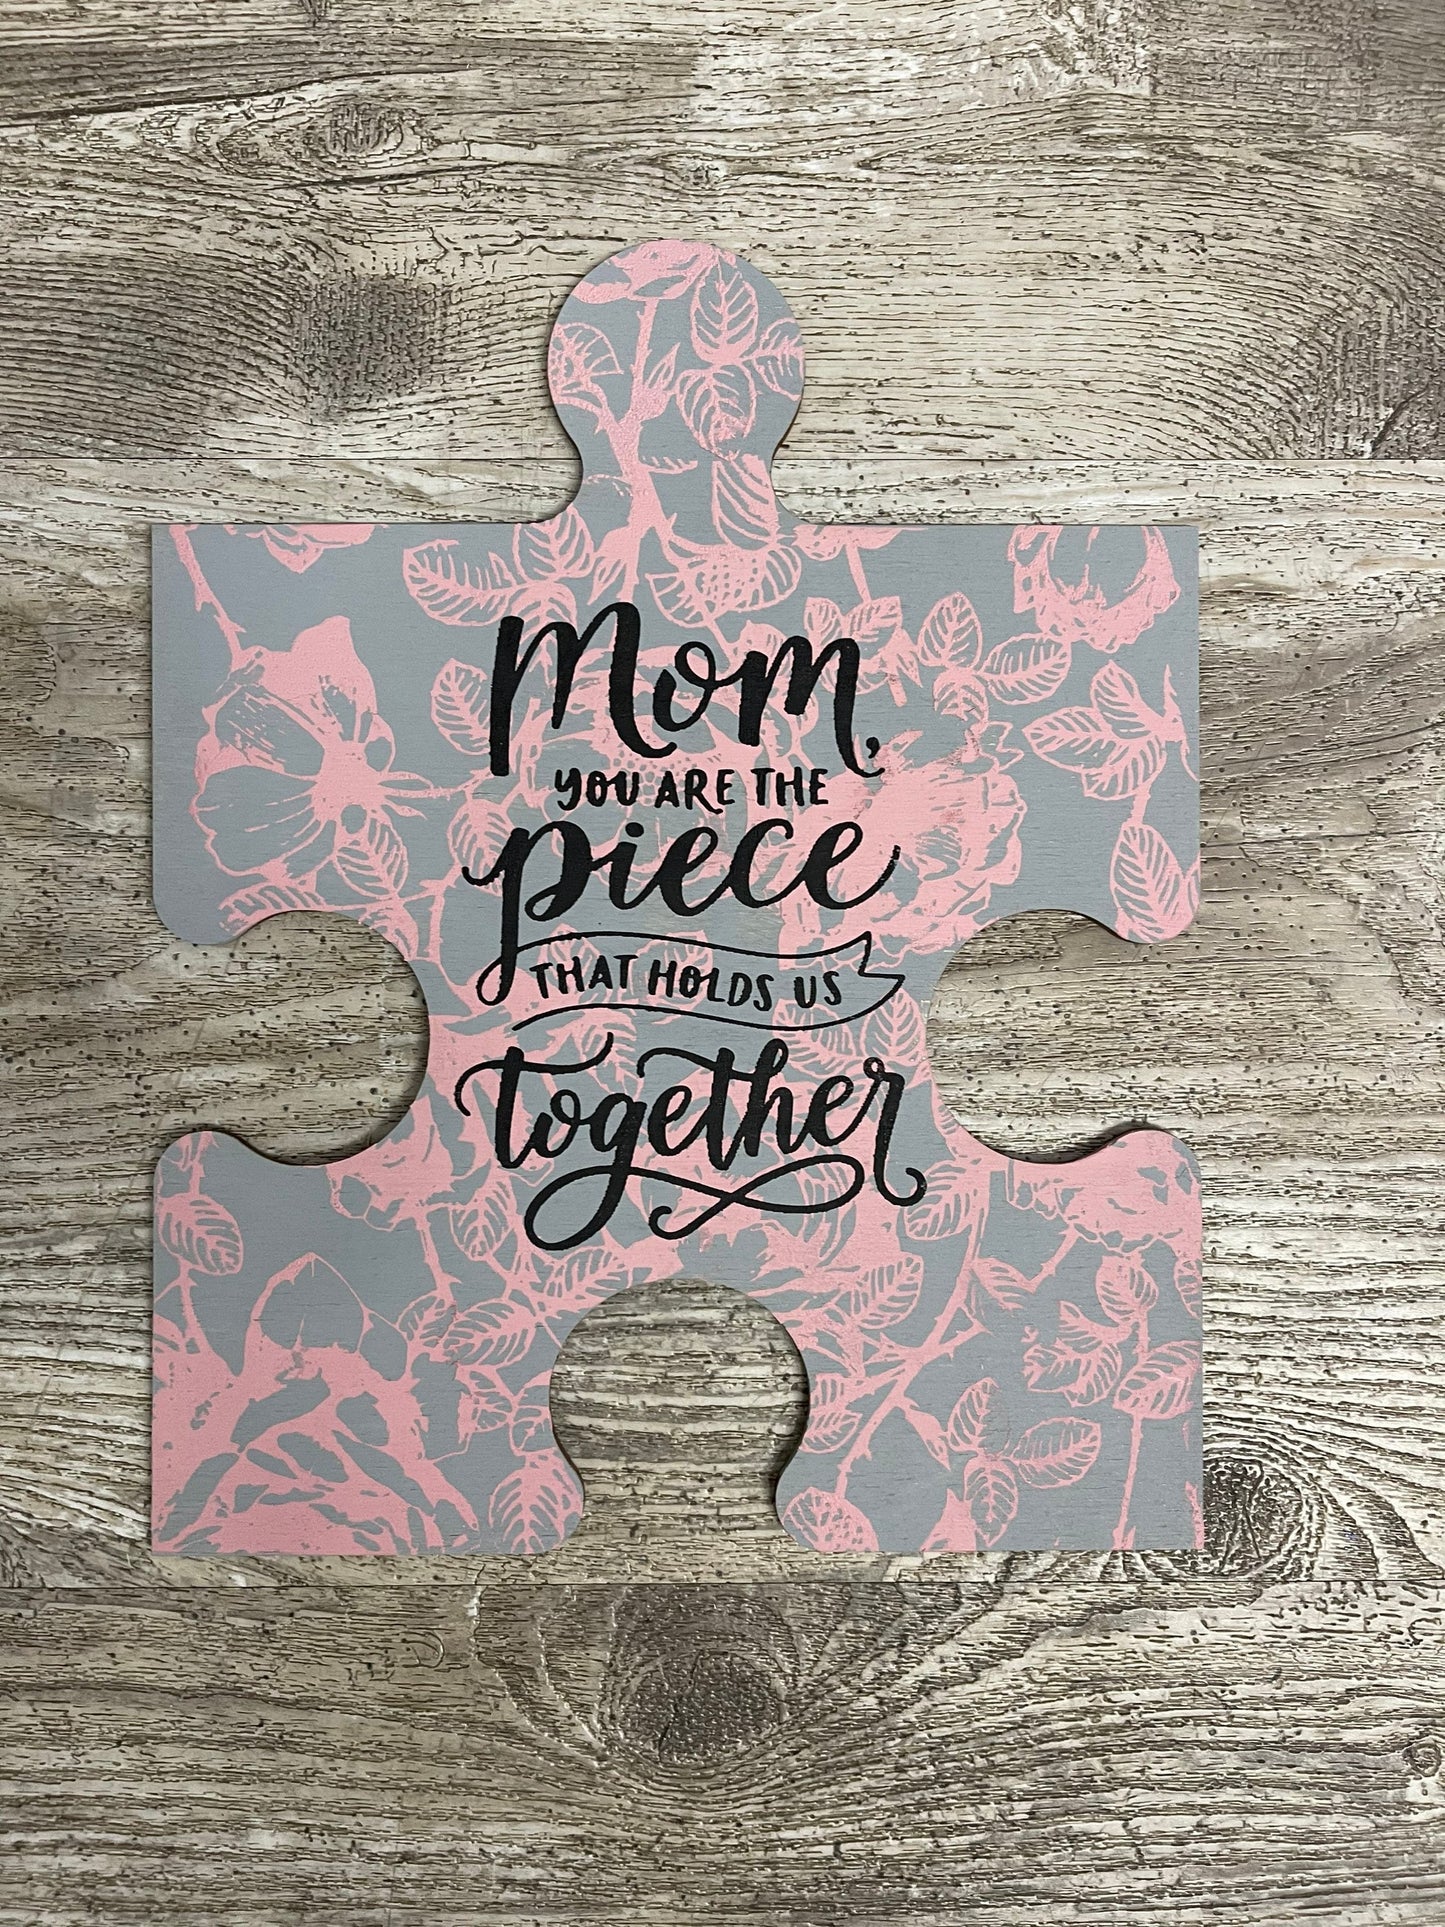 Puzzle Piece cutout, Mom you are the piece - unpainted wooden cutout - ready for you to paint